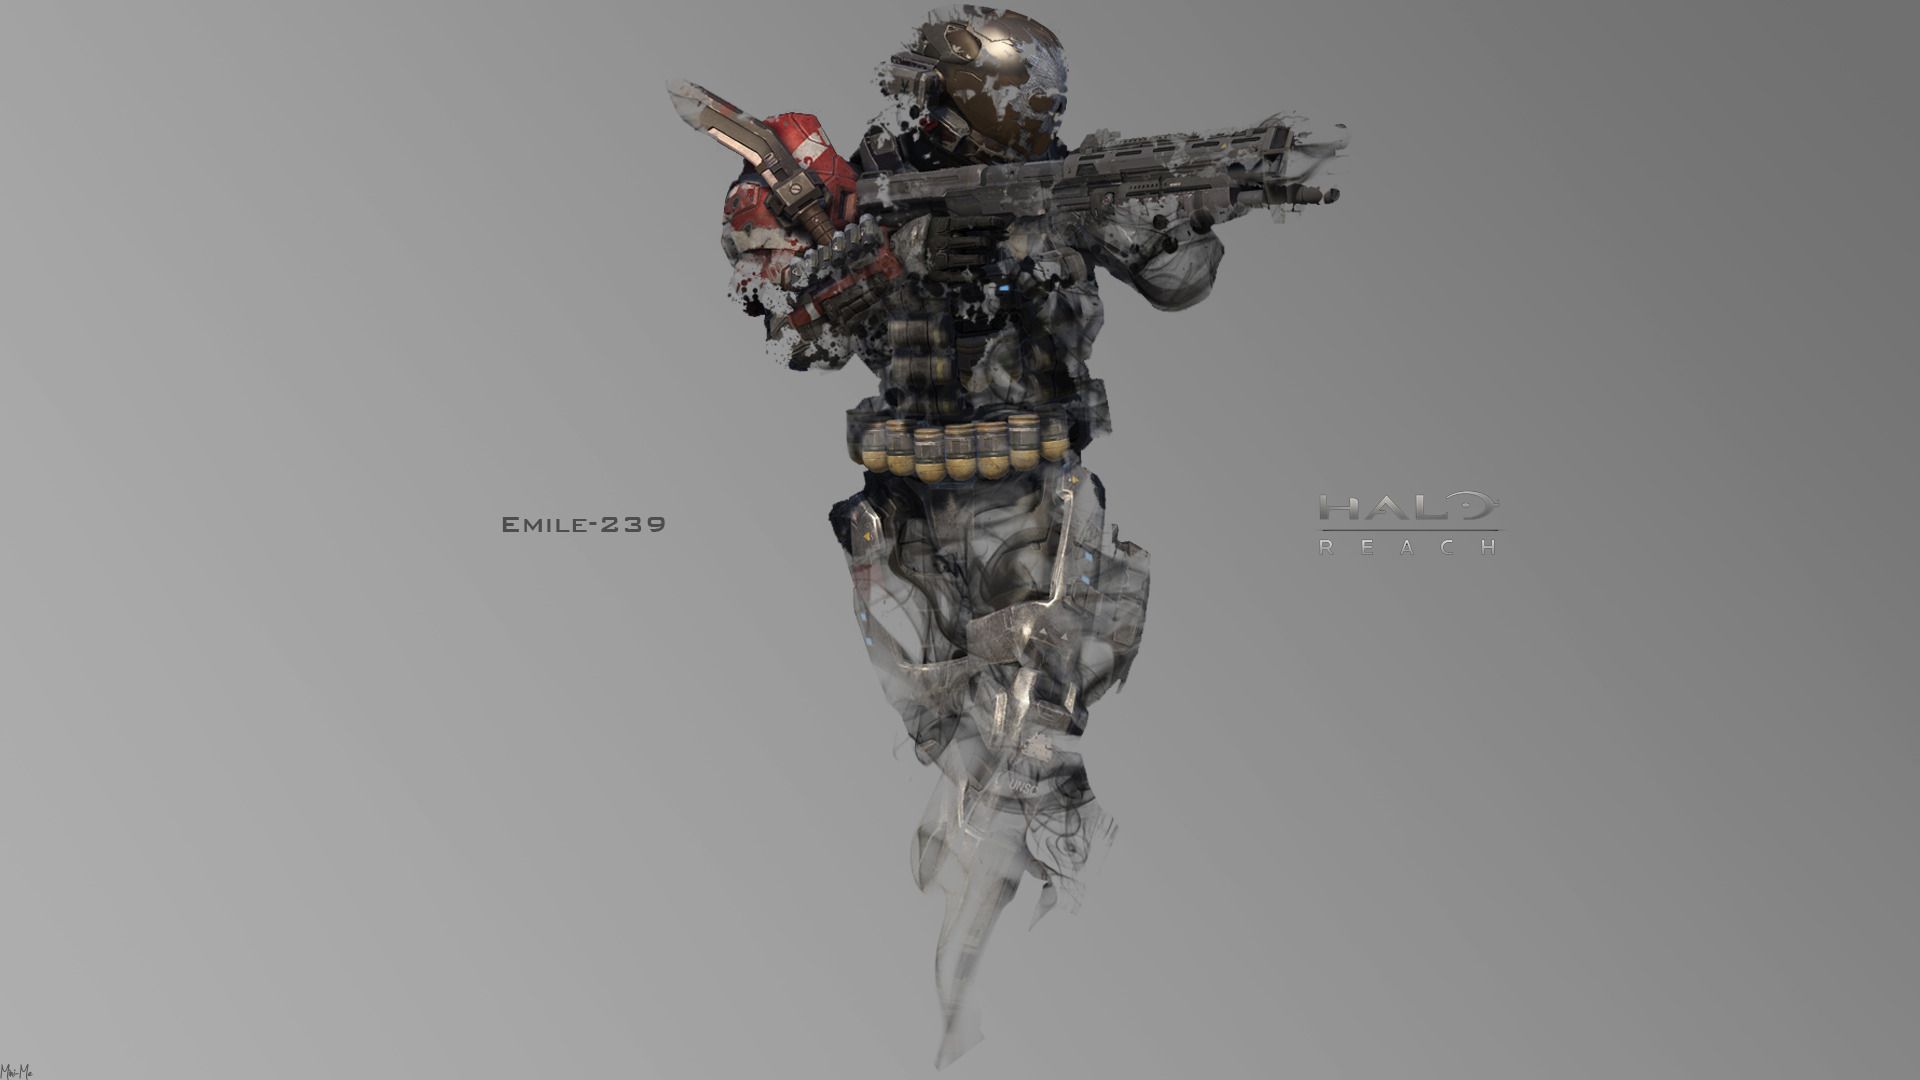 call of duty black ops ghost halo emile wallpaper